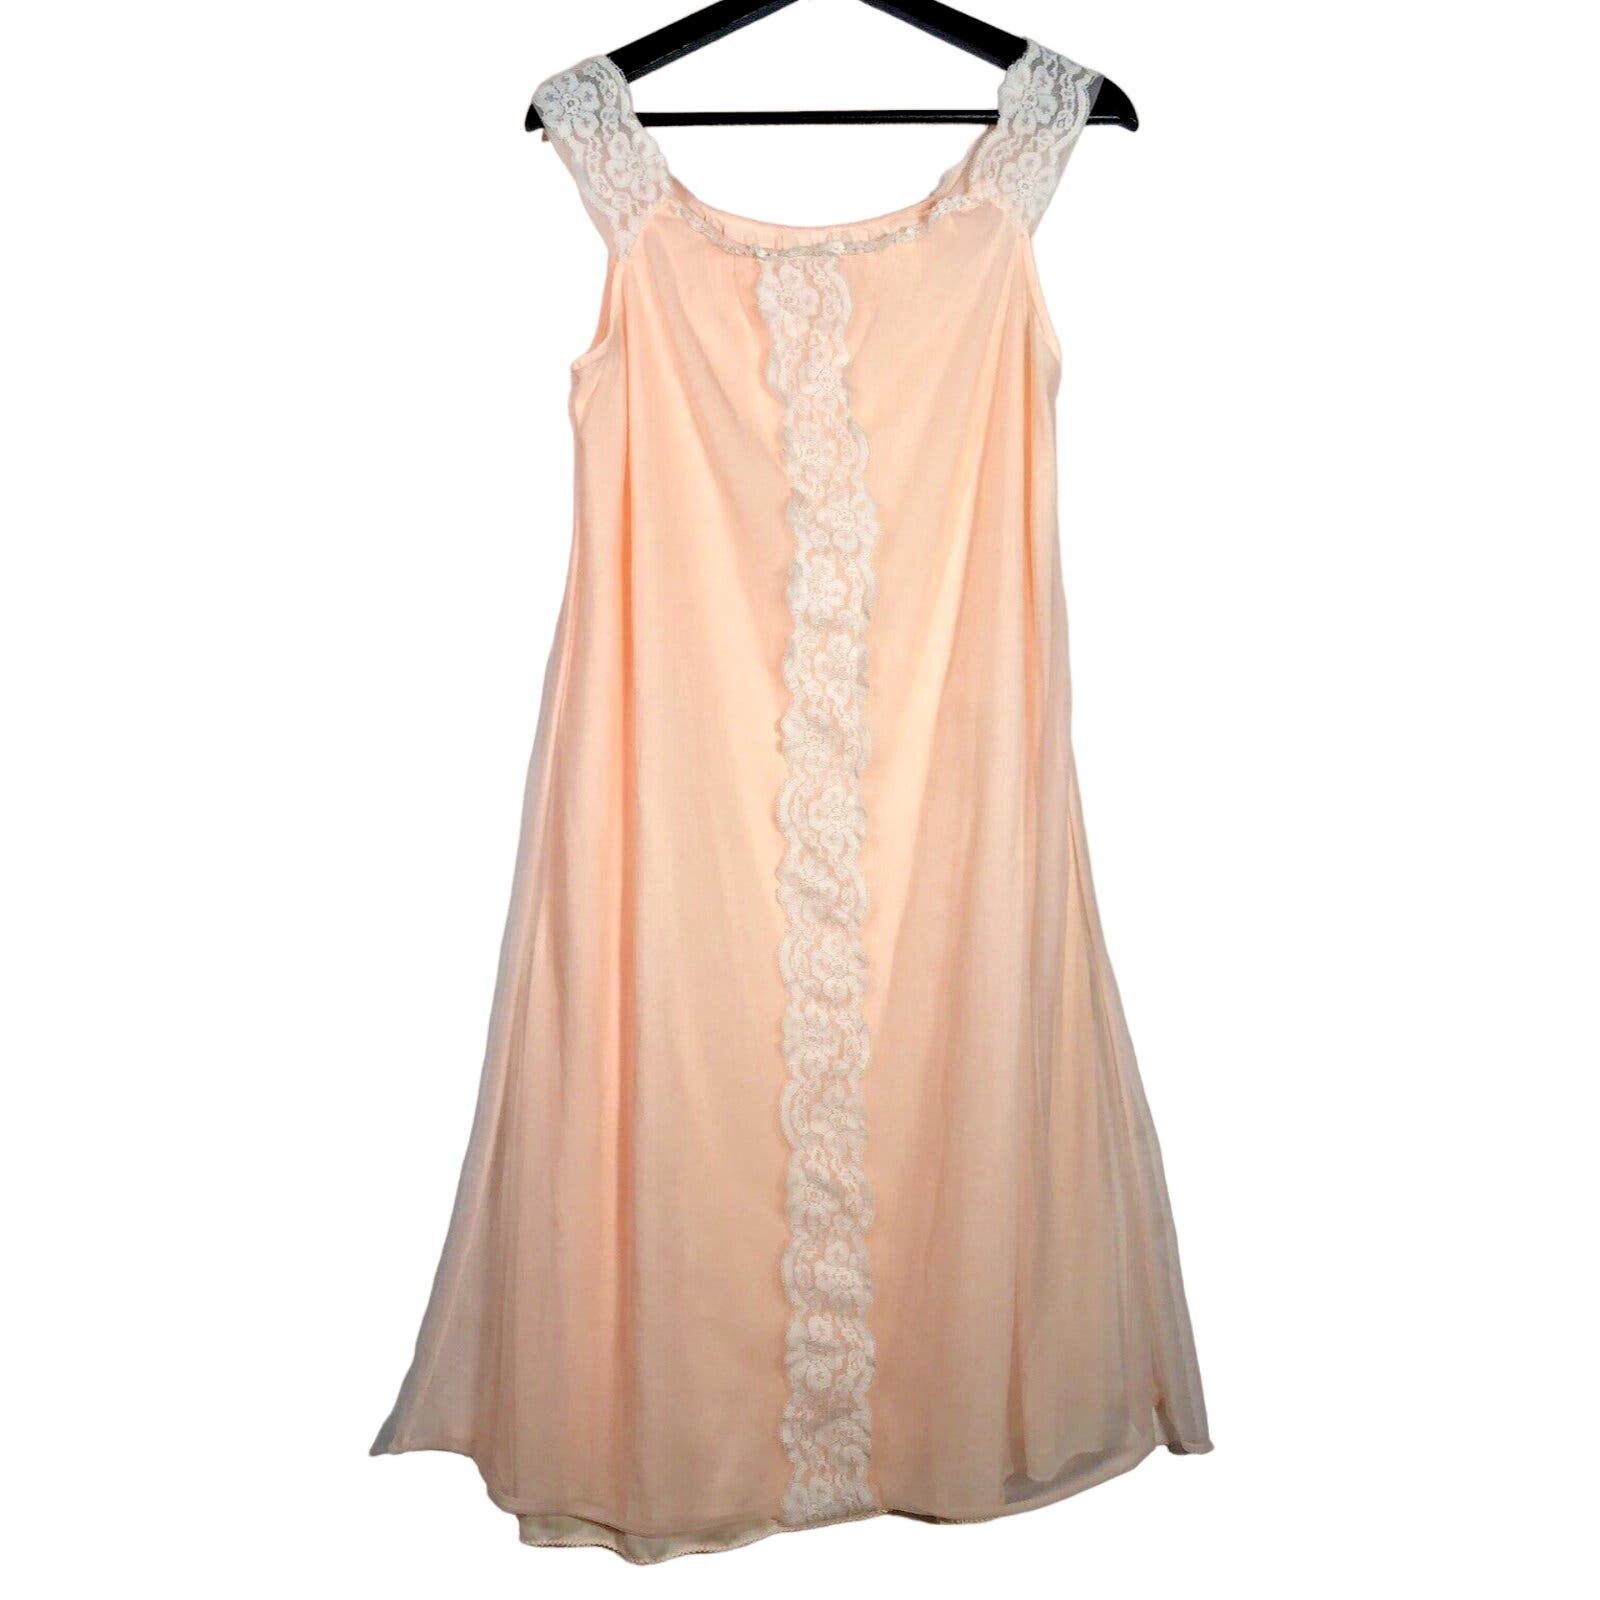 Vintage Vintage Peach and Pink Lace and Chiffon NightGown Dress S Size S / US 4 / IT 40 - 7 Thumbnail